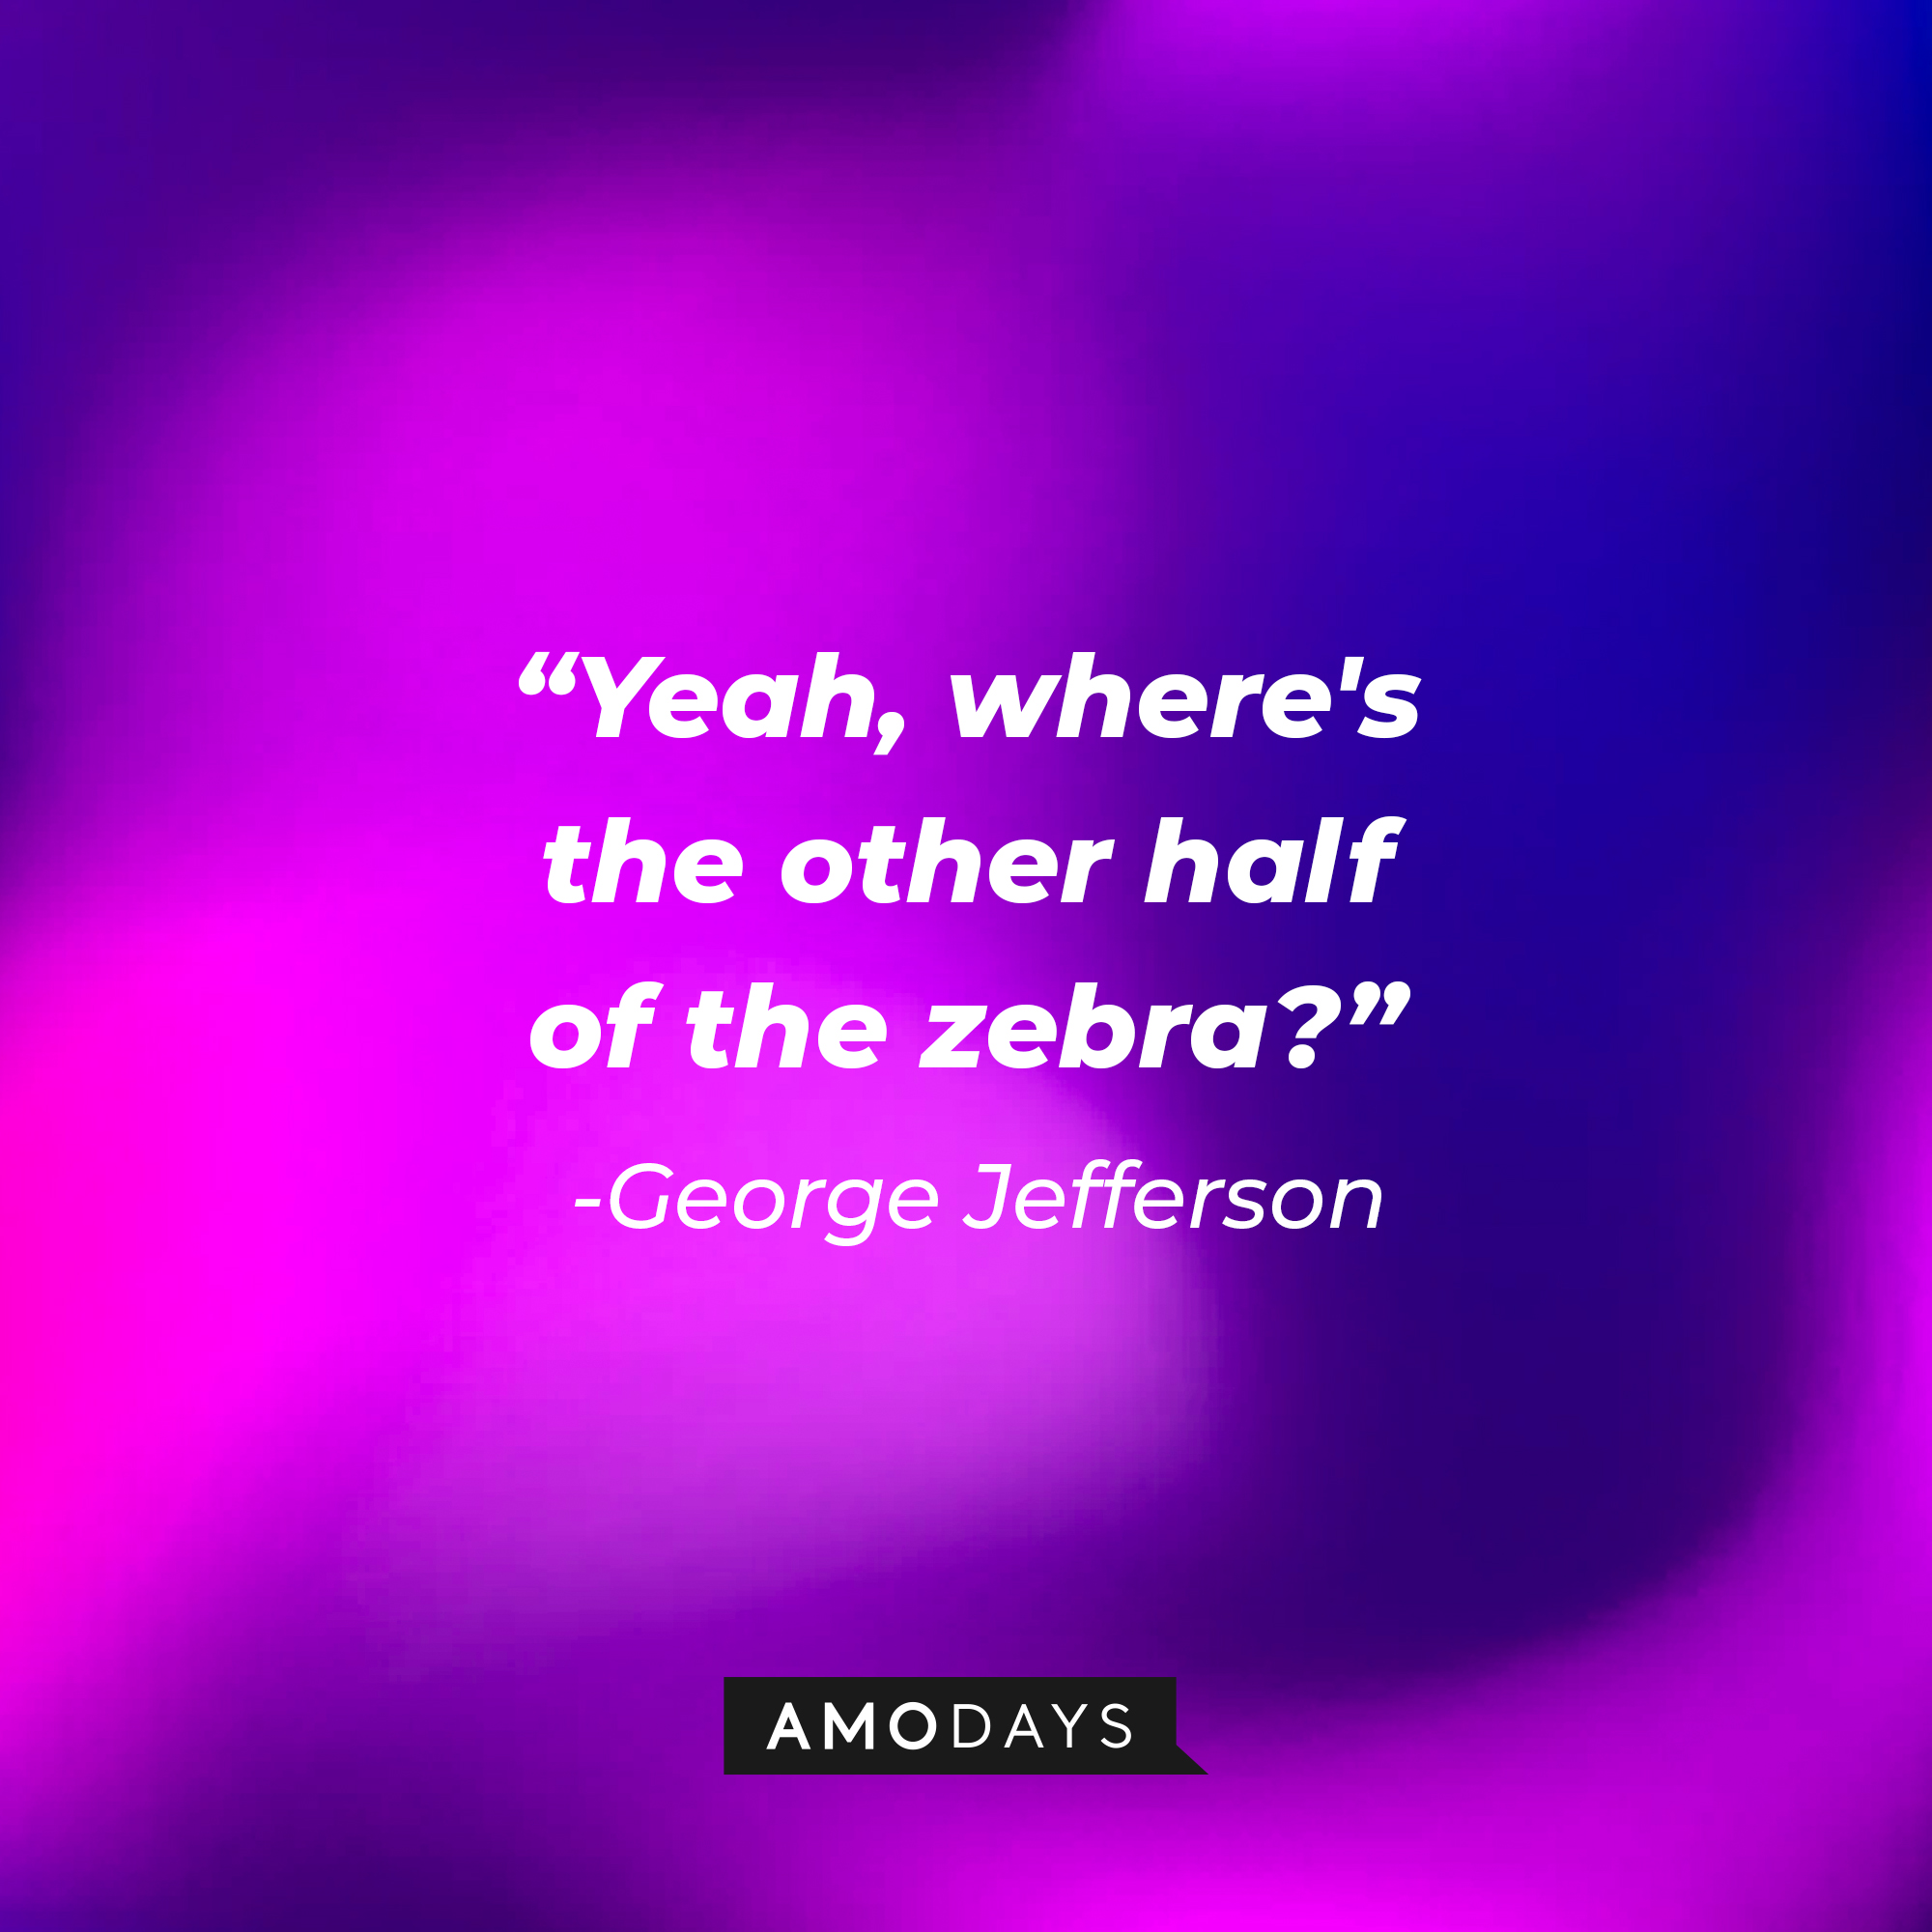 George Jefferson’s quote: “Yeah, where's the other half of the zebra?” | Source: AmoDays